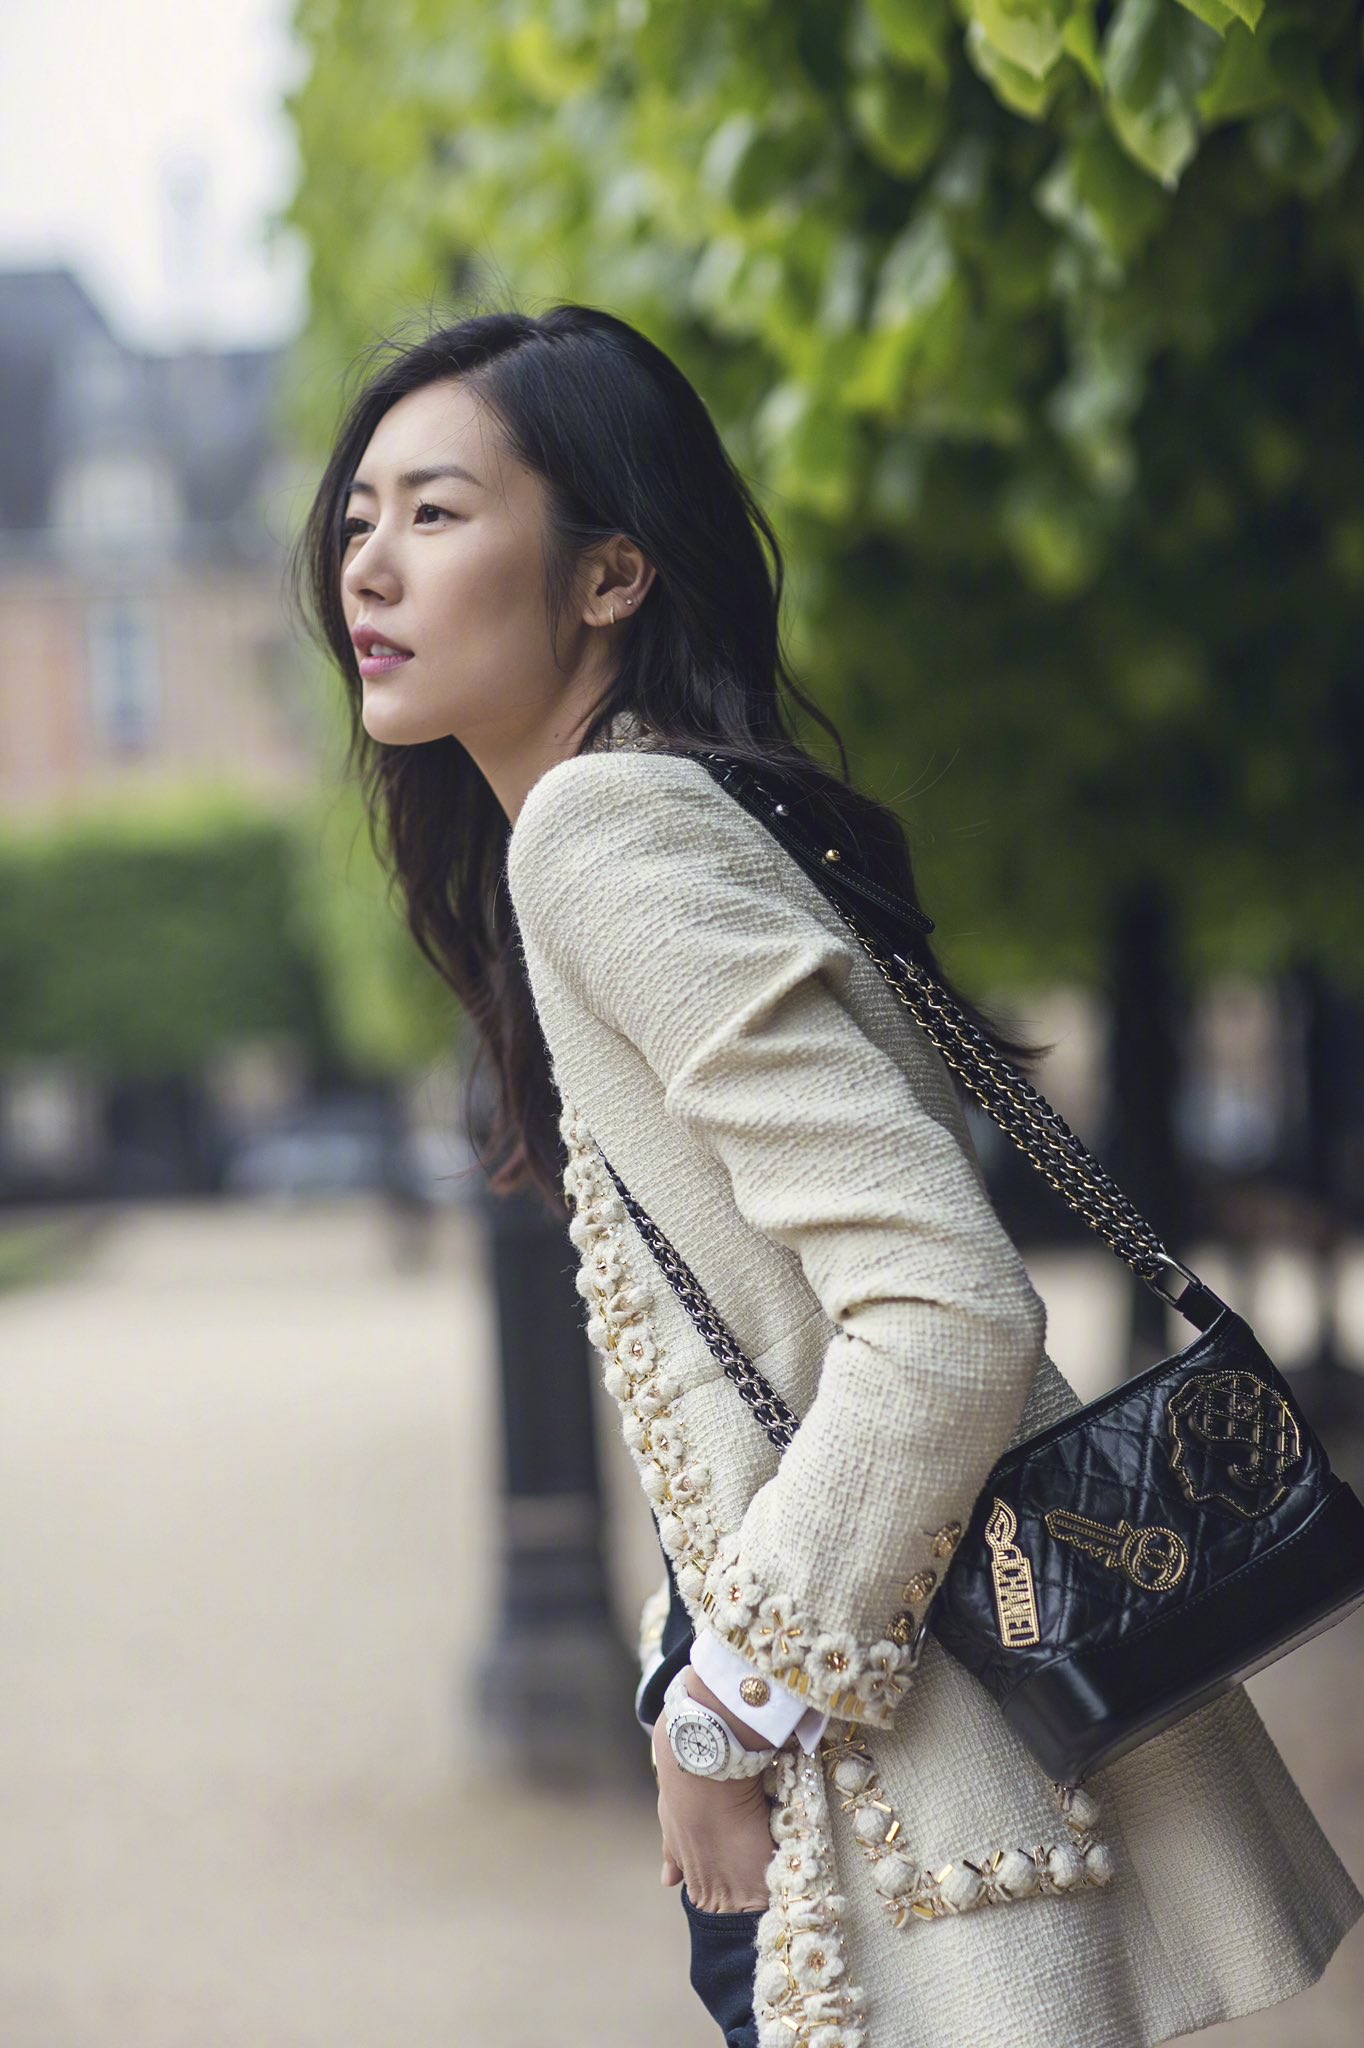 cdrama tweets on X: Model, Liu Wen, appointed as brand ambassador for  Chanel's beauty and fragrance line. #刘雯 #liuwen  / X